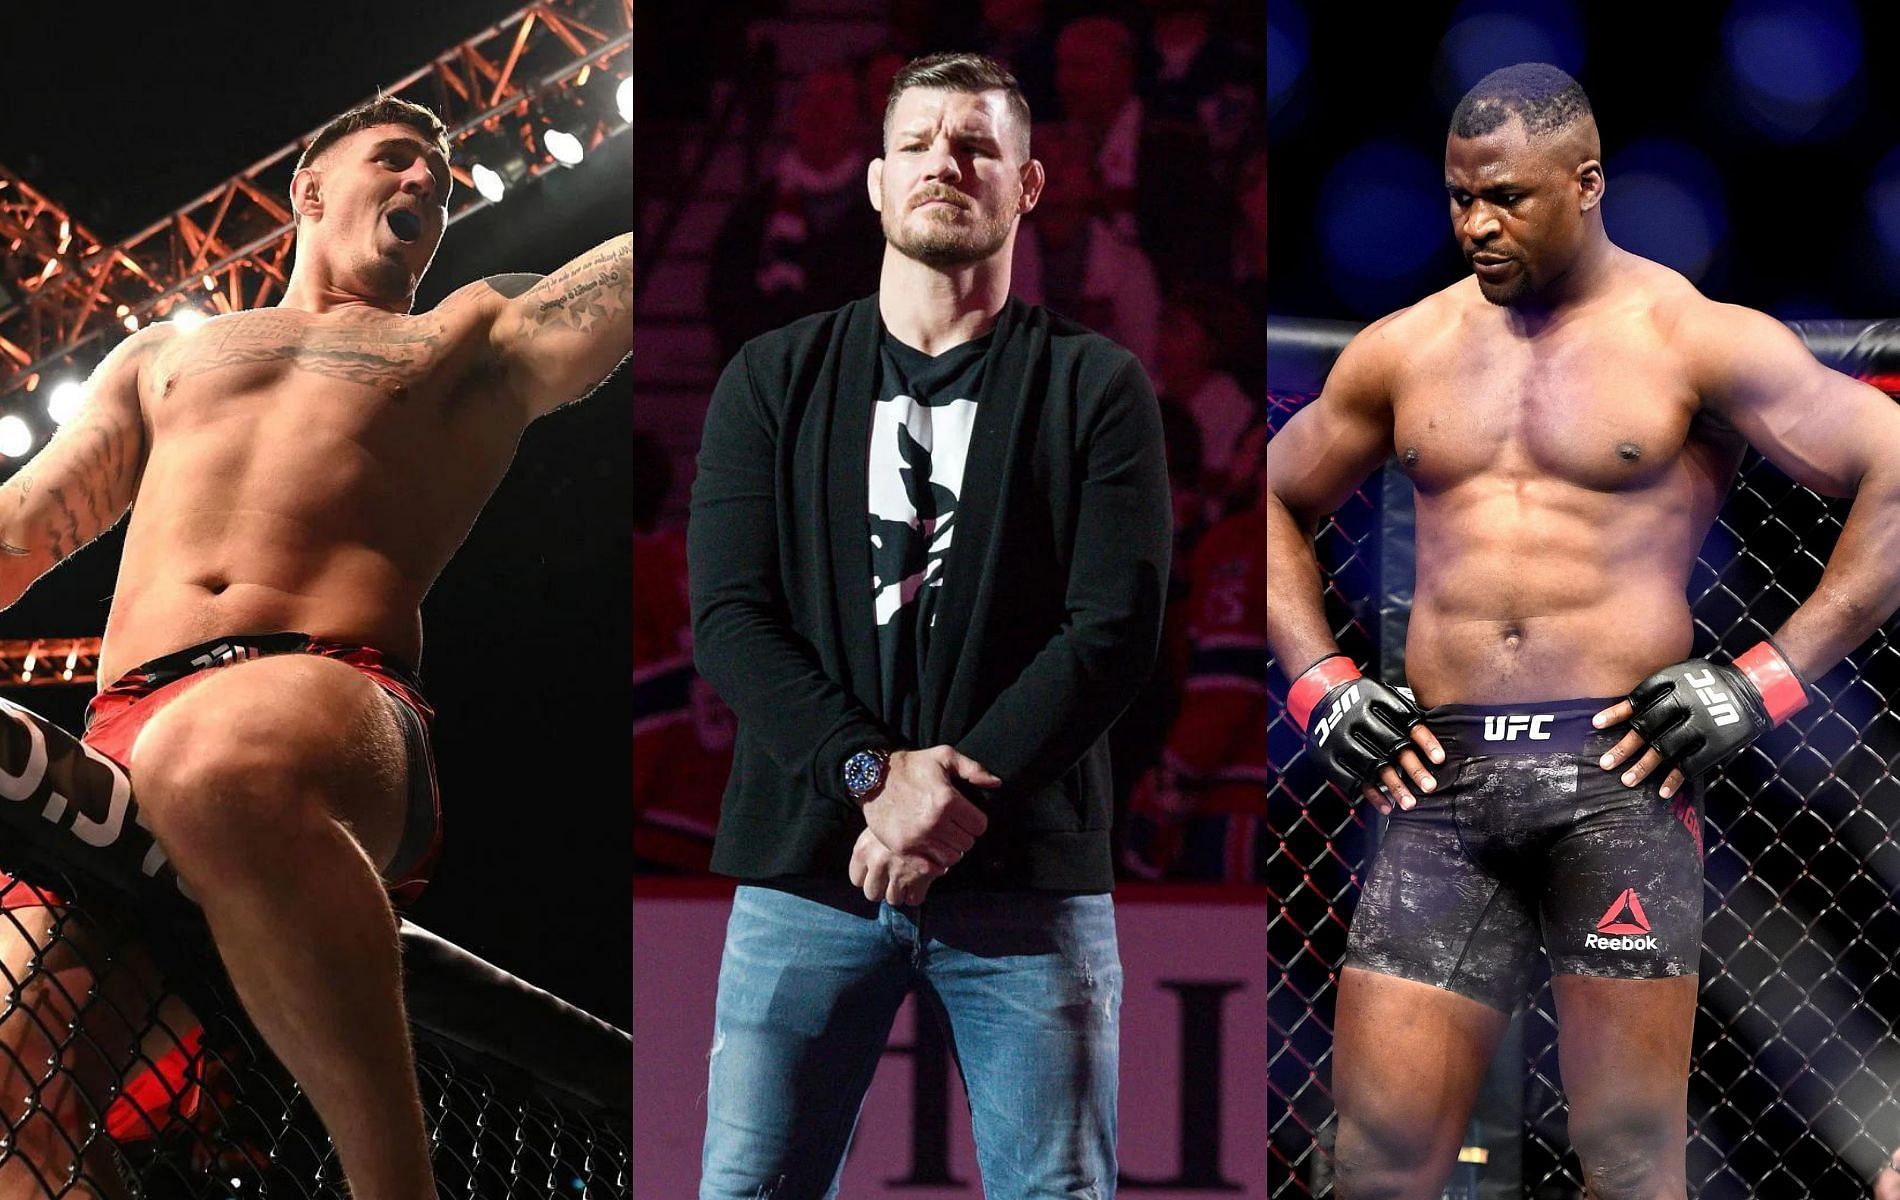 Tom Aspinall (left), Michael Bisping (center) &amp; Francis Ngannou (right)